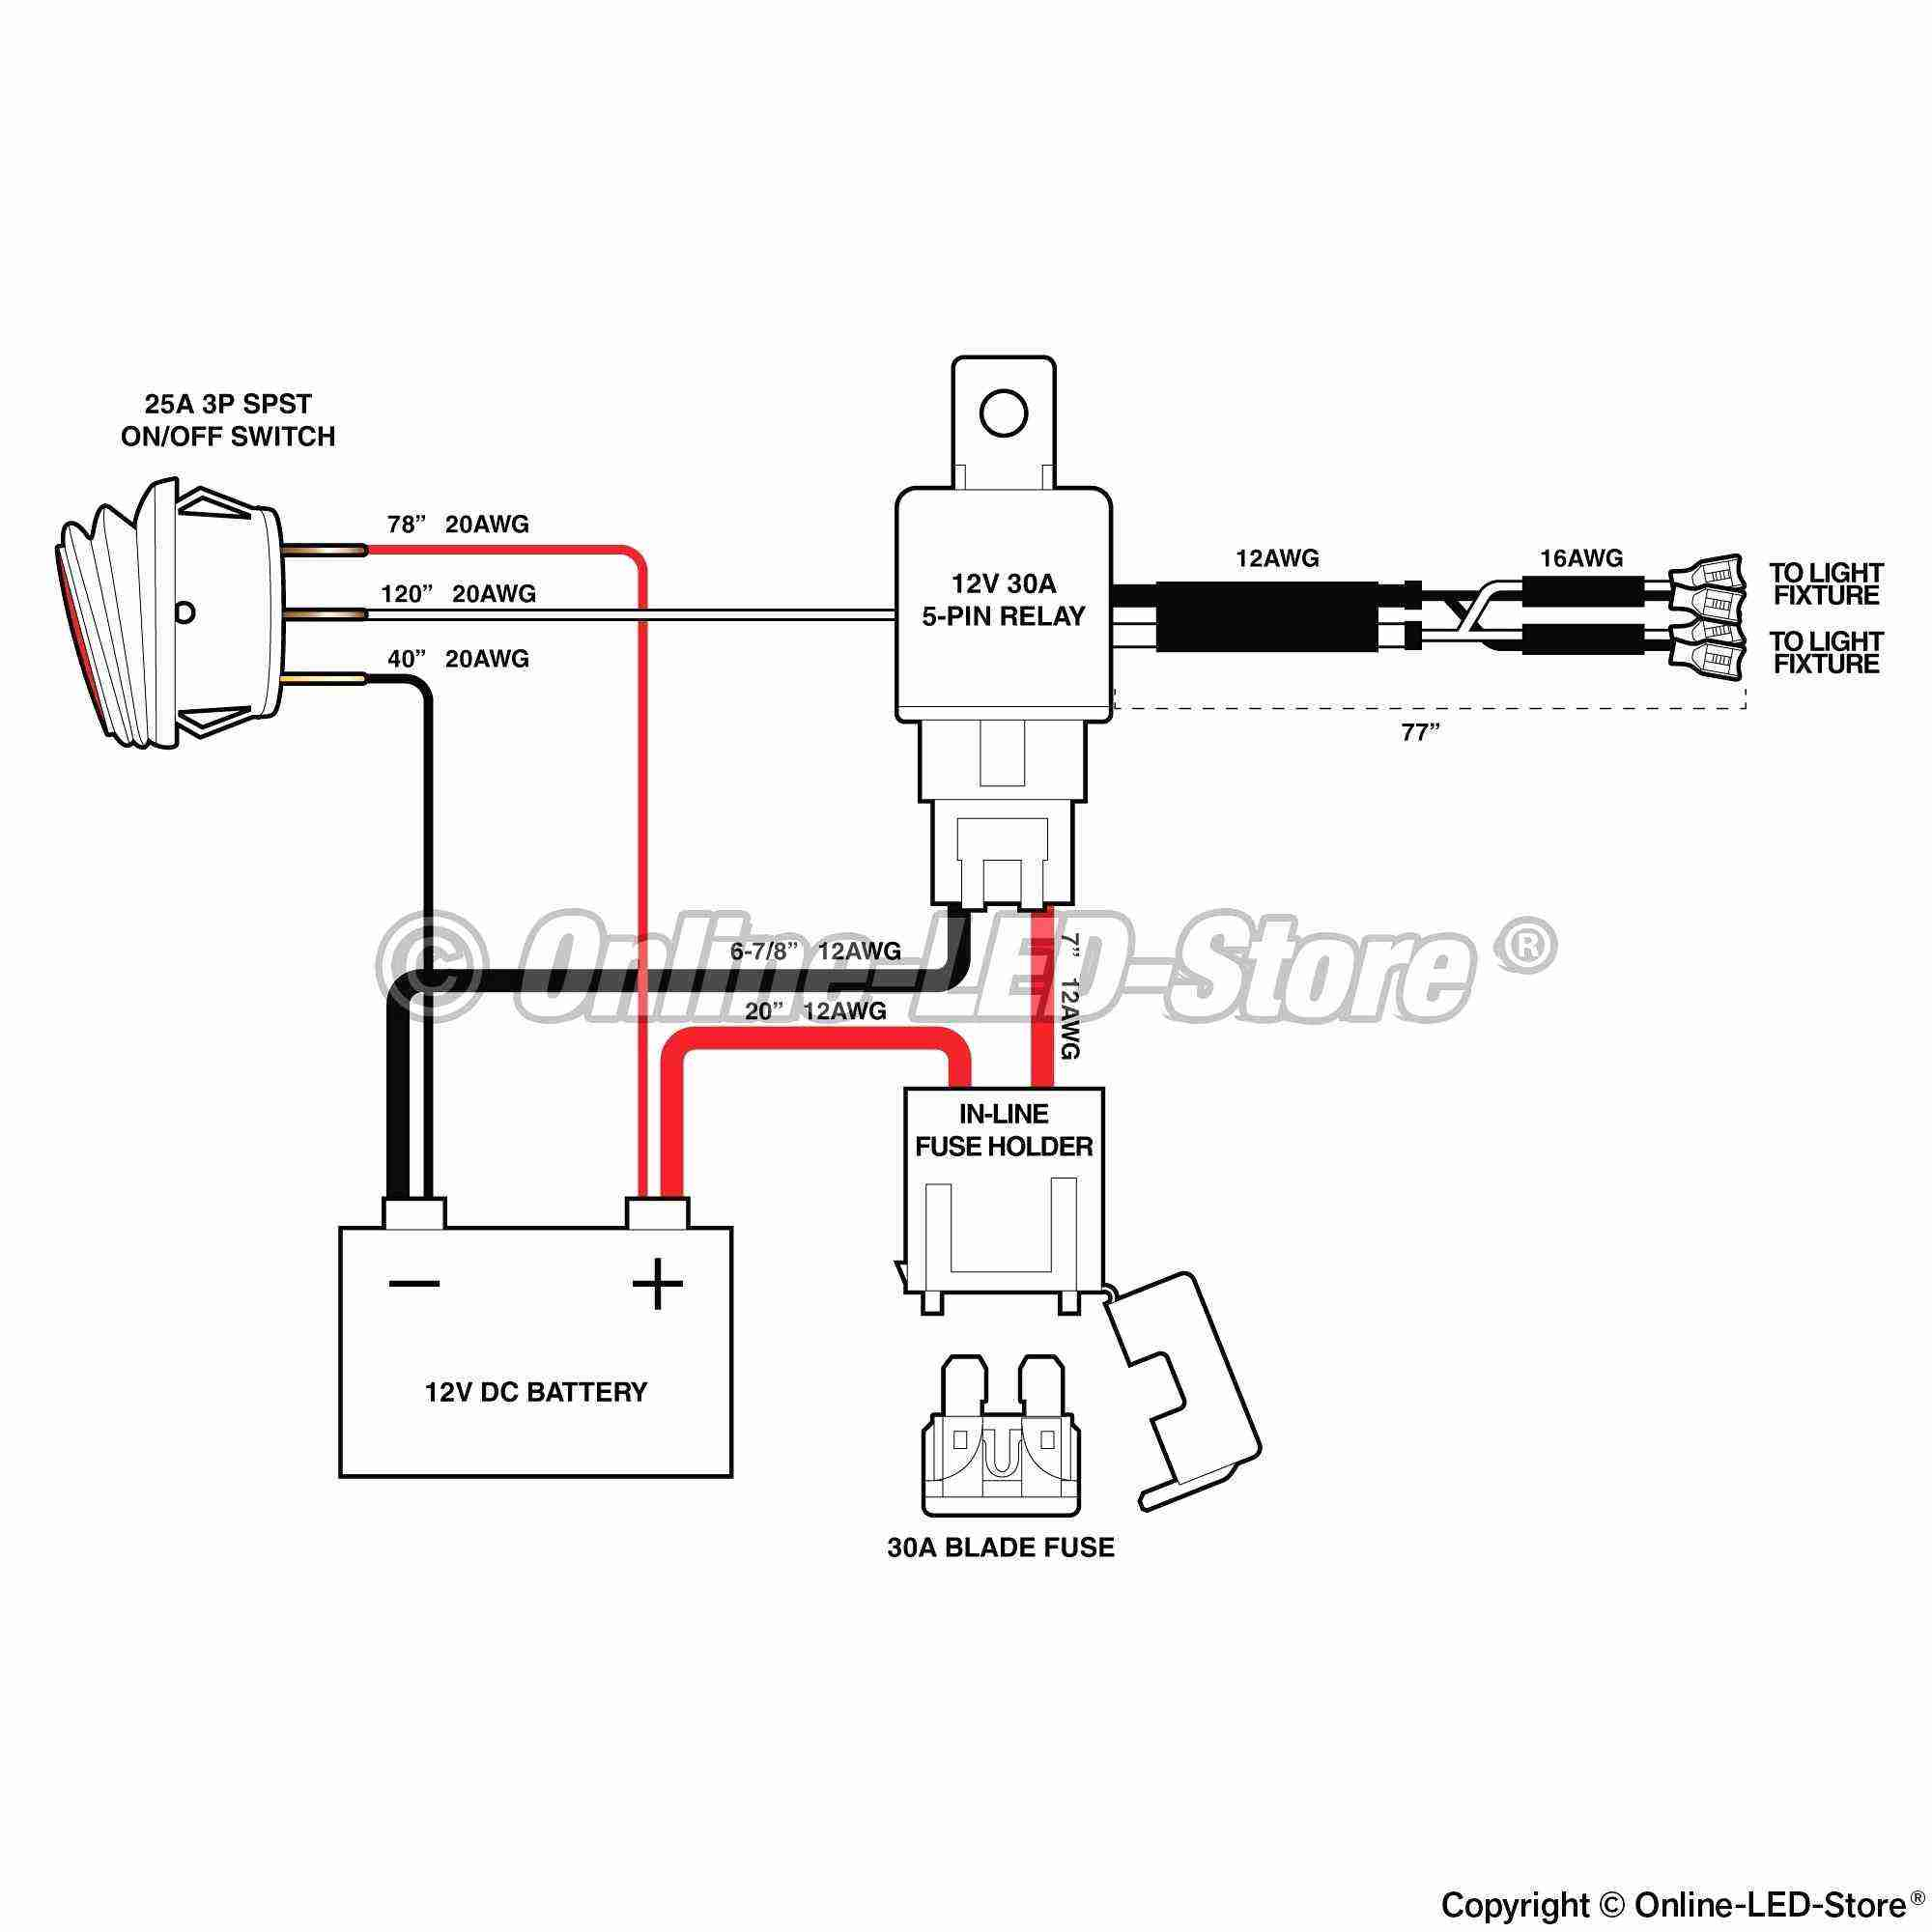 Led Jeep Light Switch Wiring Diagram - Data Wiring Diagram Schematic - Led Light Wiring Diagram